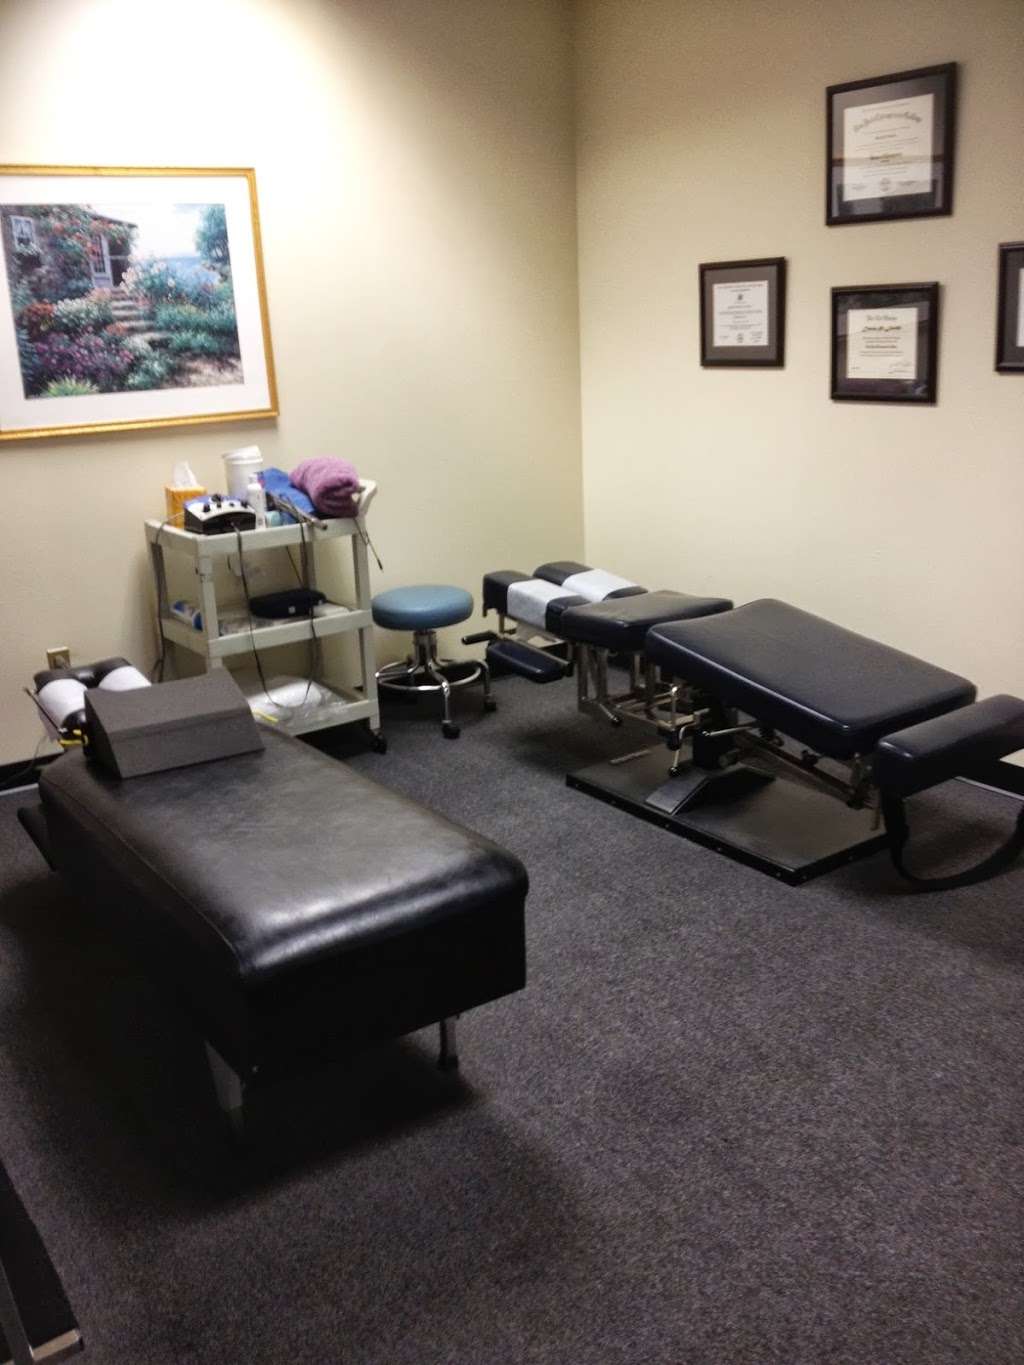 Lavelle Chiropractic & Wellness | 540 N State Rd, Briarcliff Manor, NY 10510 | Phone: (914) 923-4545